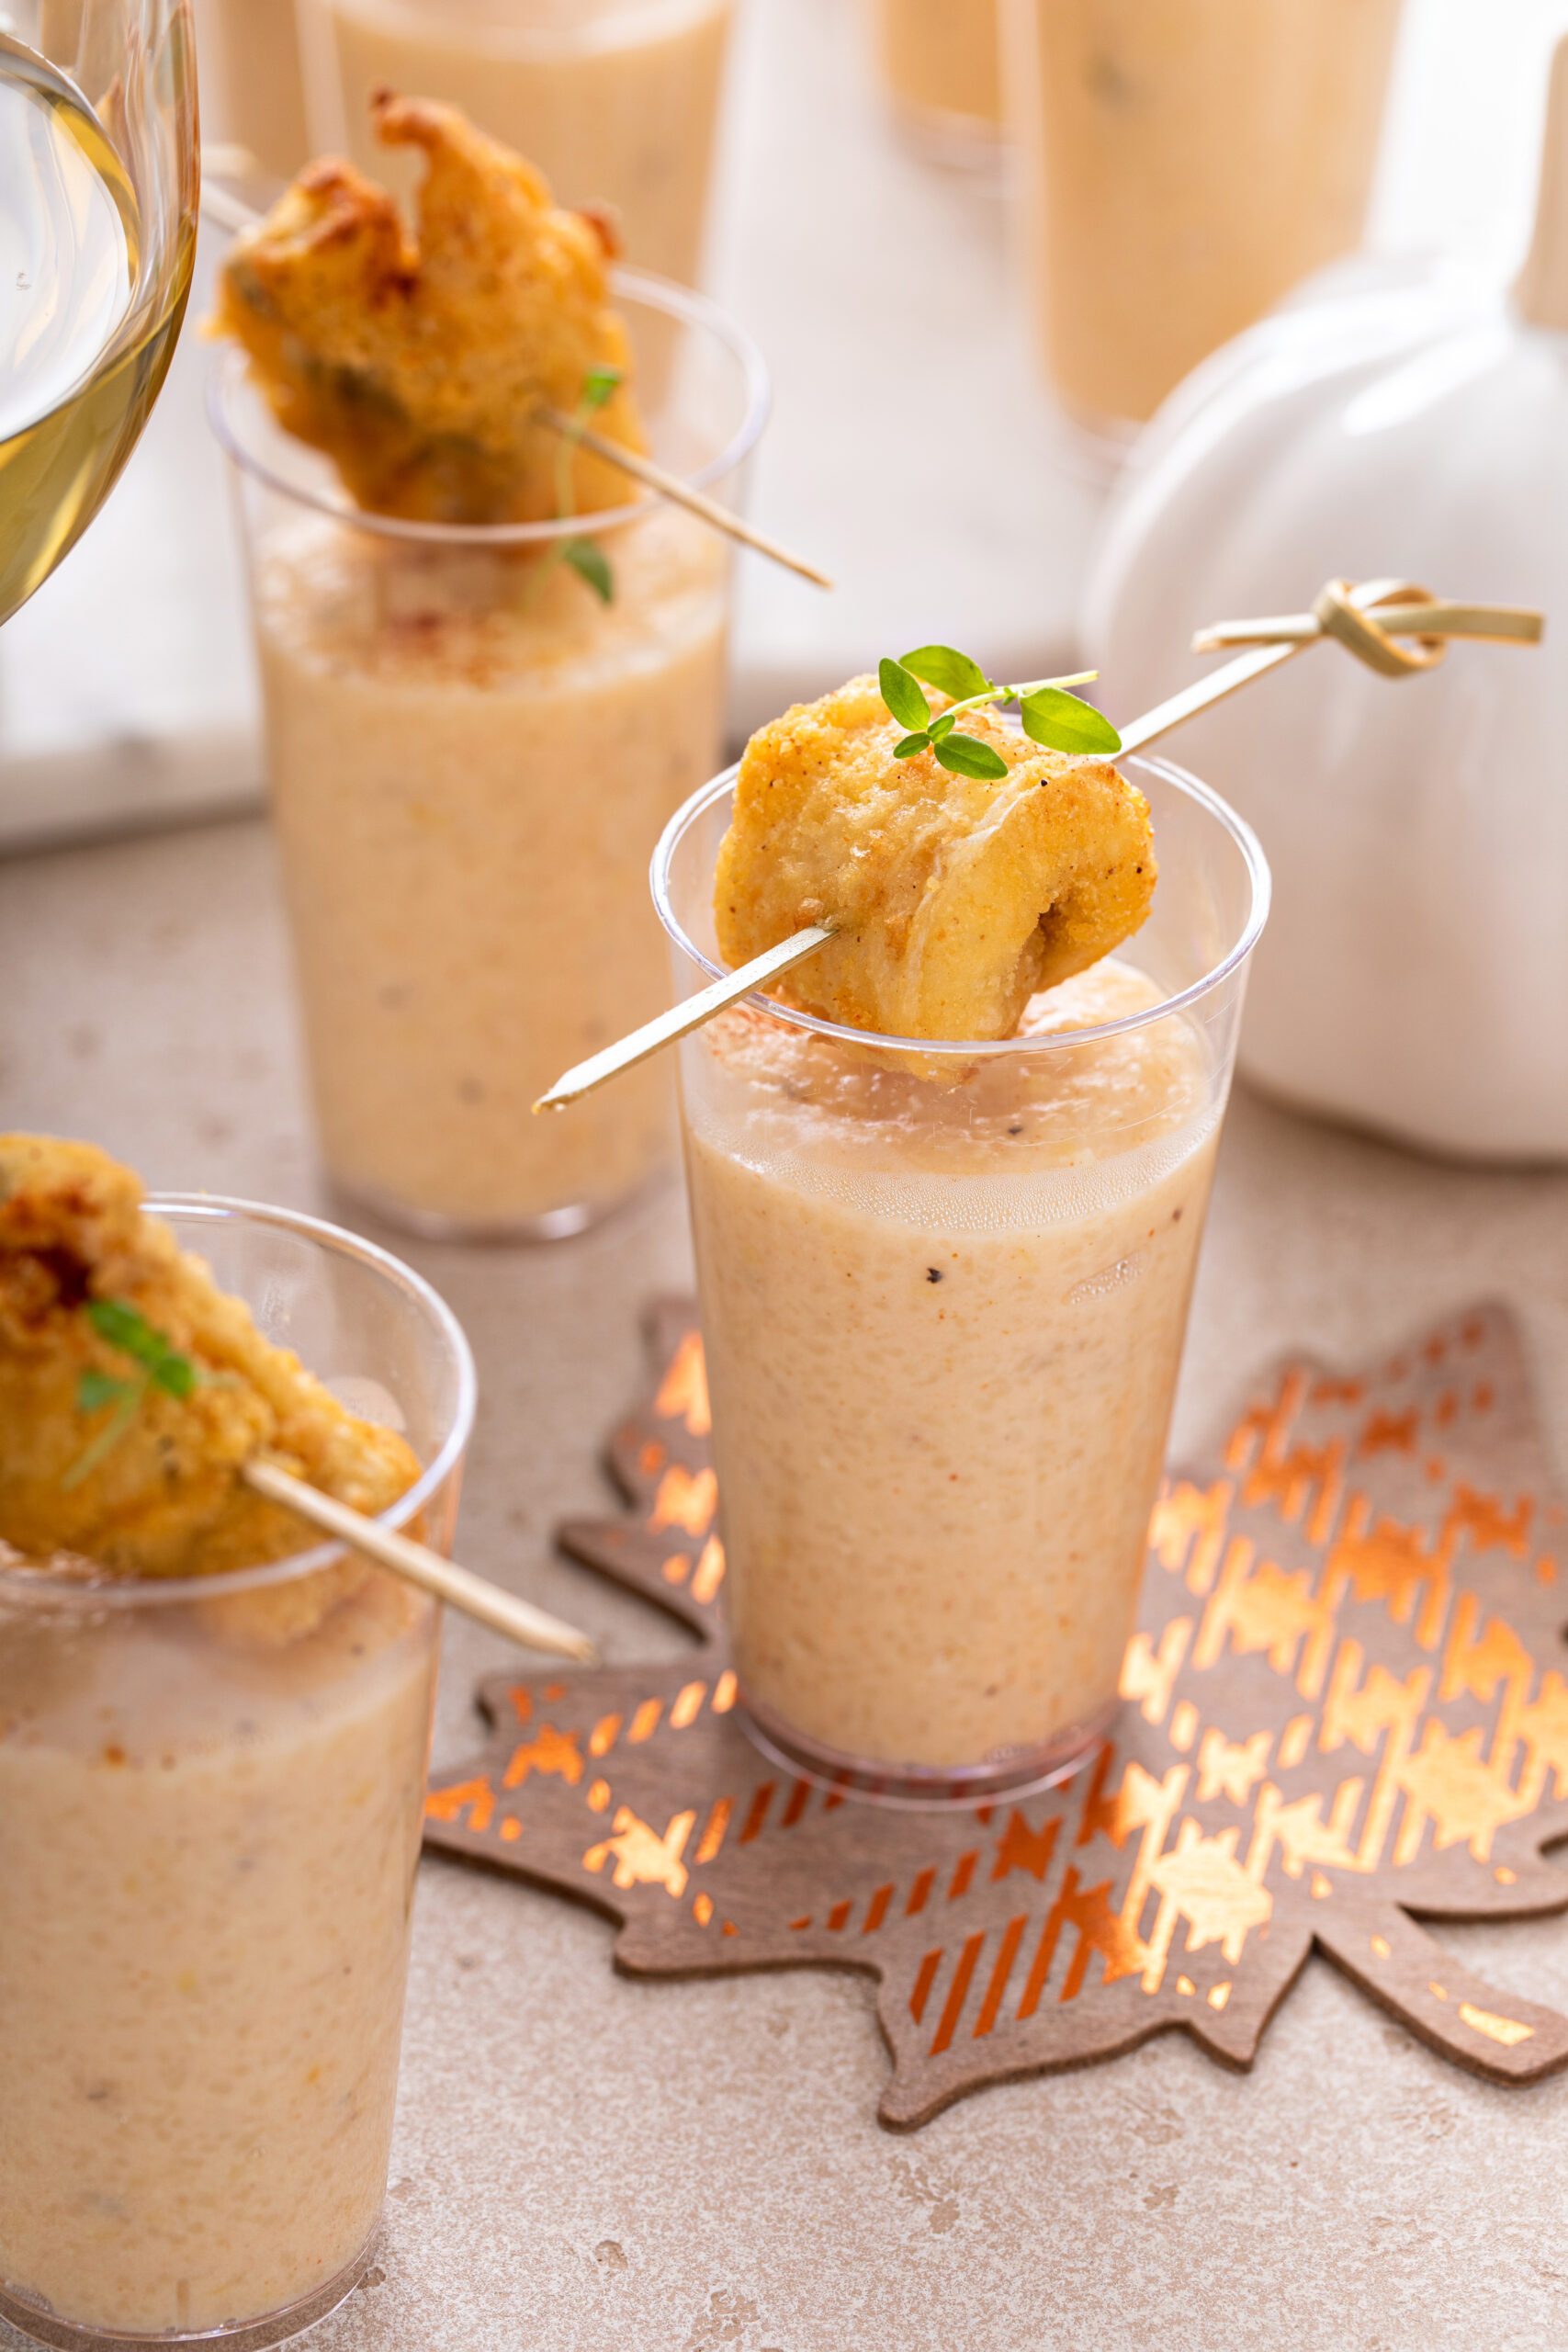 Hands down the perfect appetizer for any holiday party this year! Click here to try a Catfish and Grits Shooter!